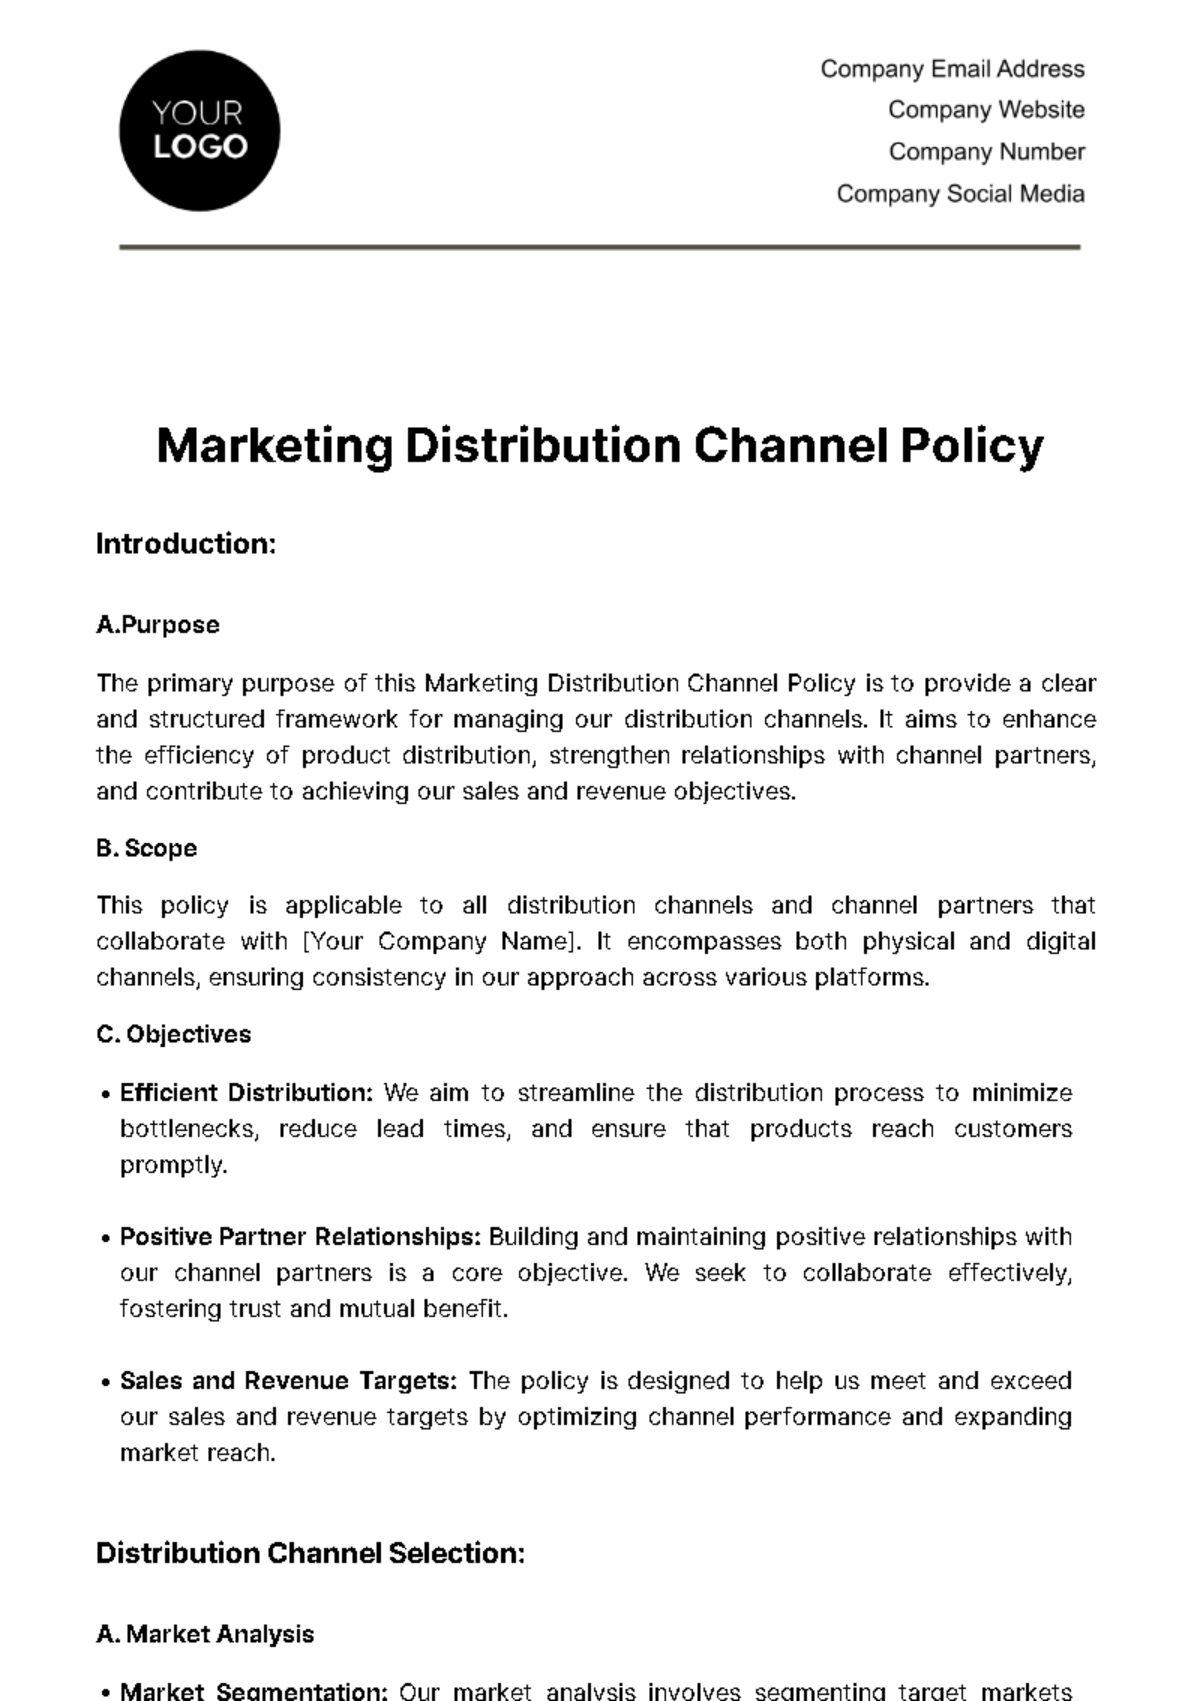 Marketing Distribution Channel Policy Template